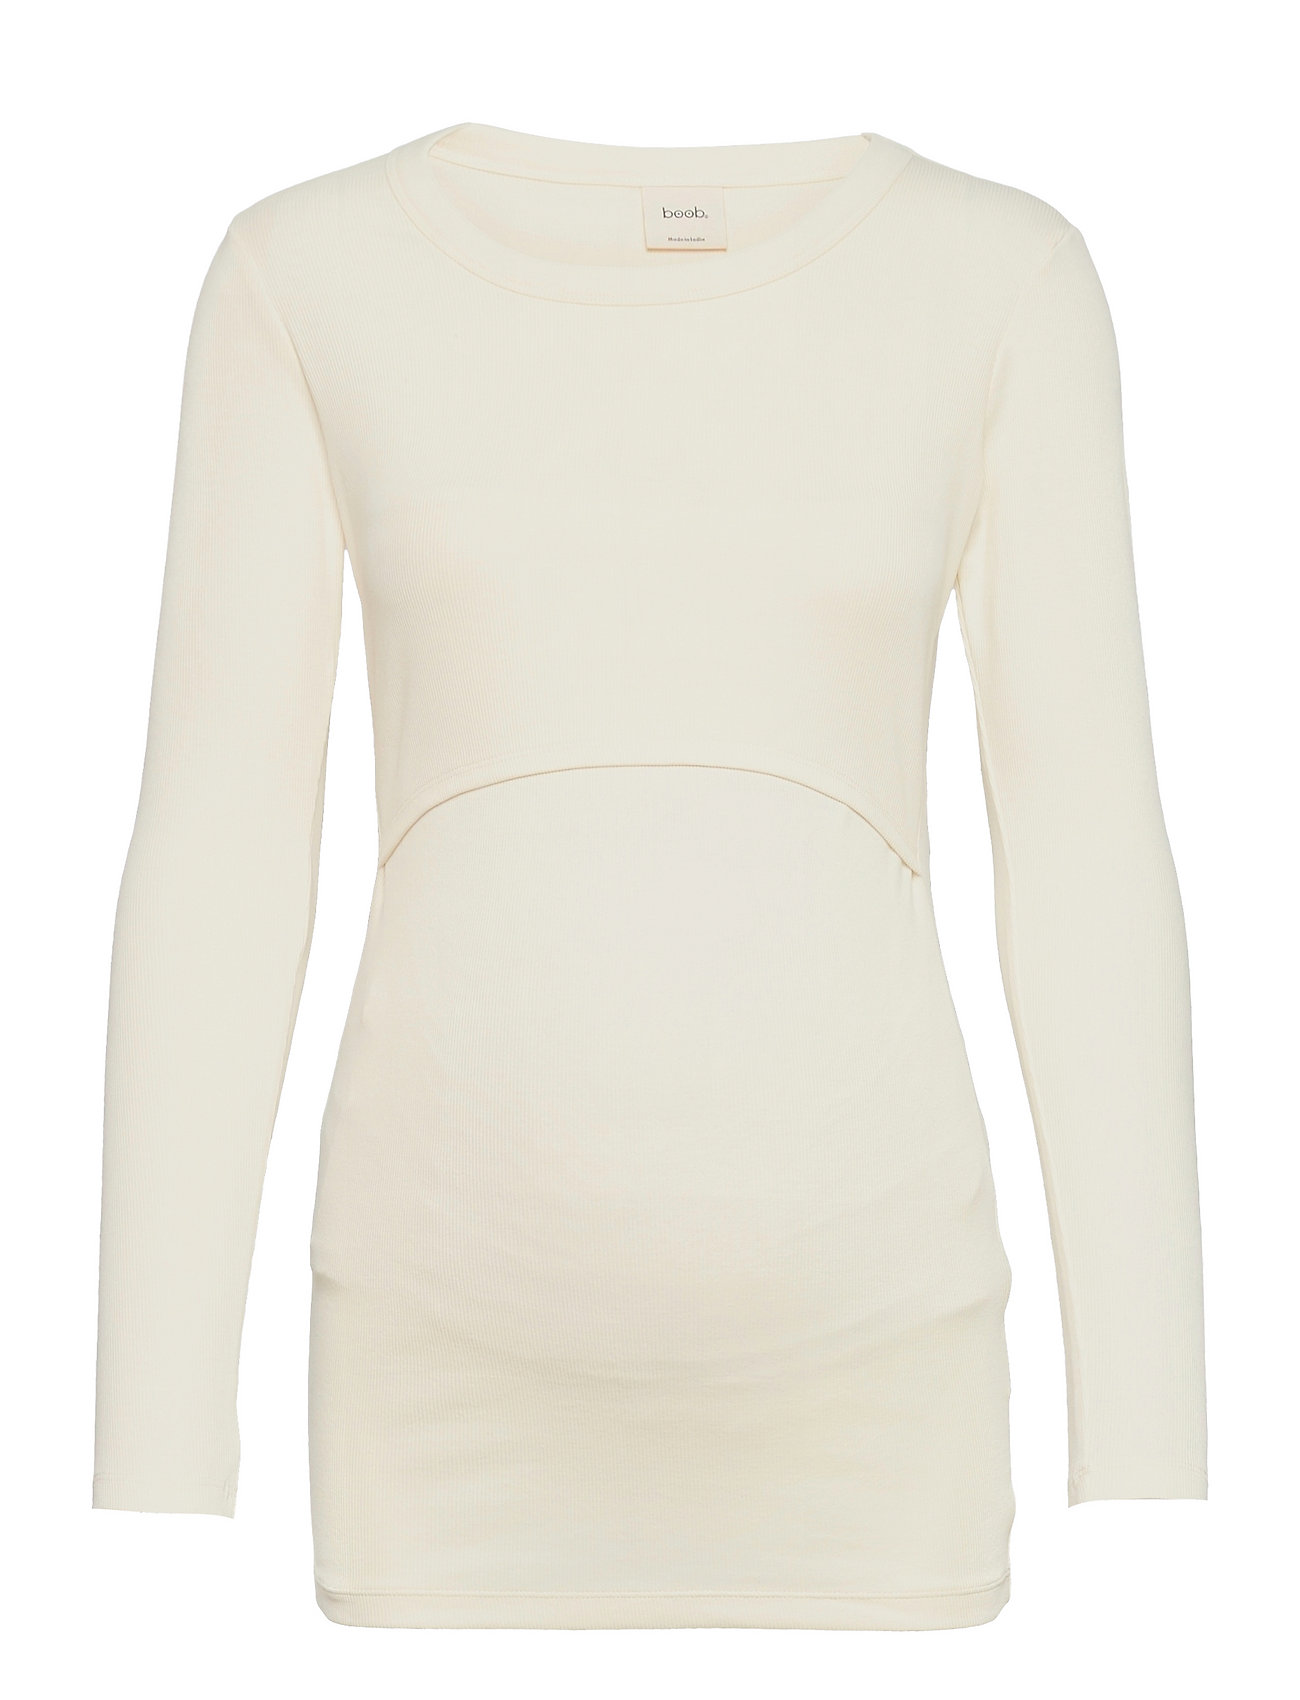 Signe L/S Top T-shirts & Tops Long-sleeved Valkoinen Boob